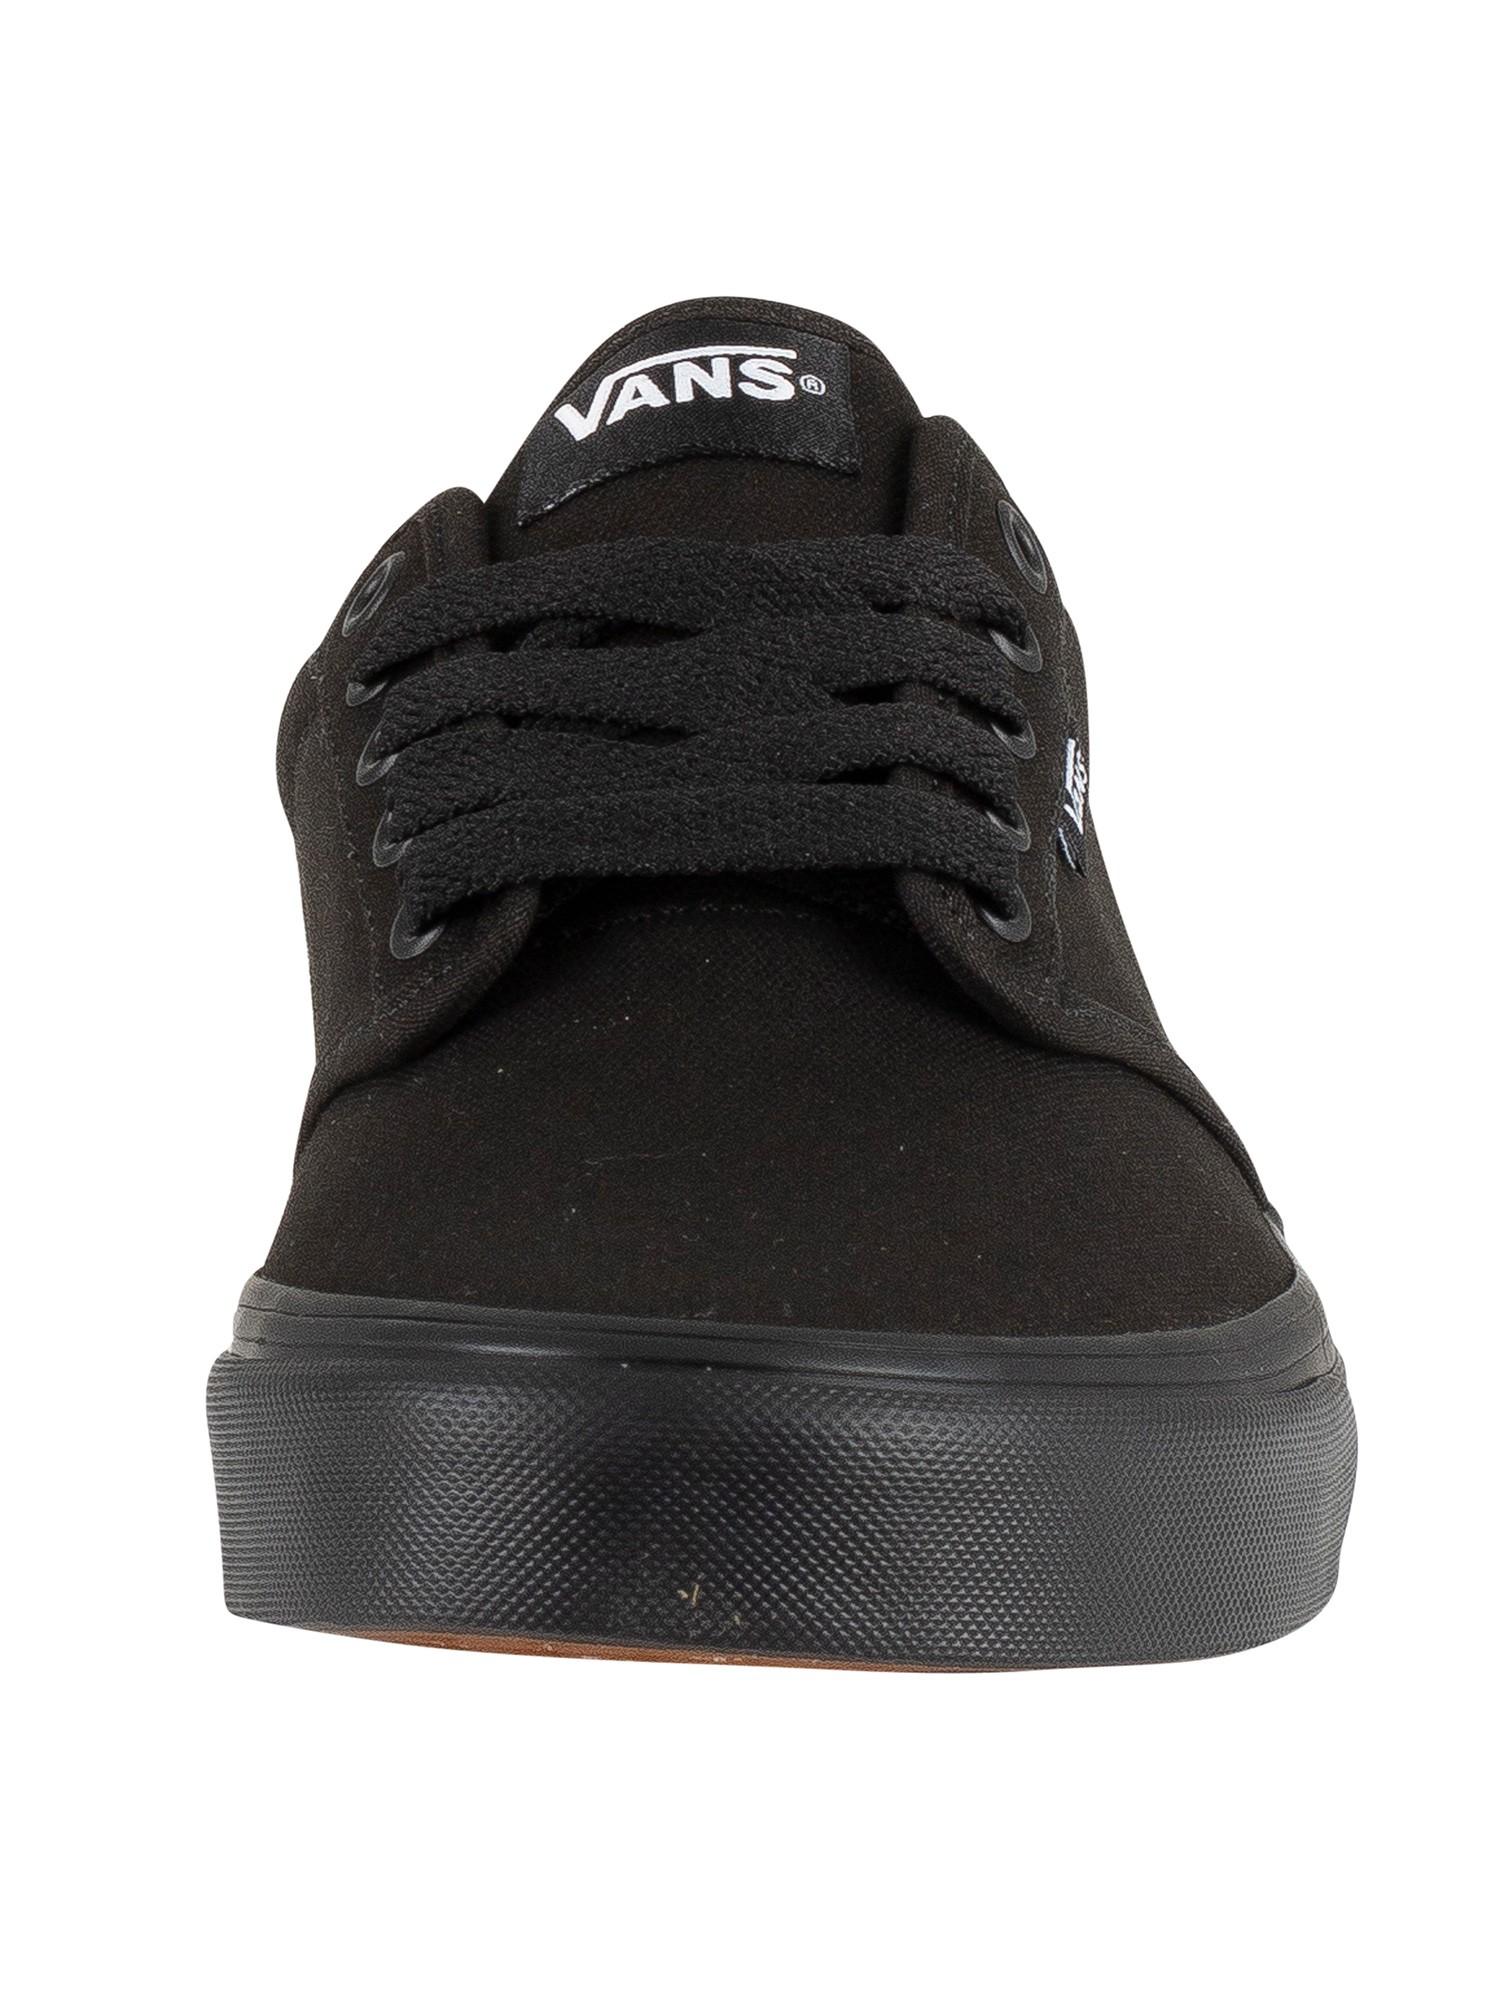 Vans Atwood Canvas Trainers in Black for Men | Lyst